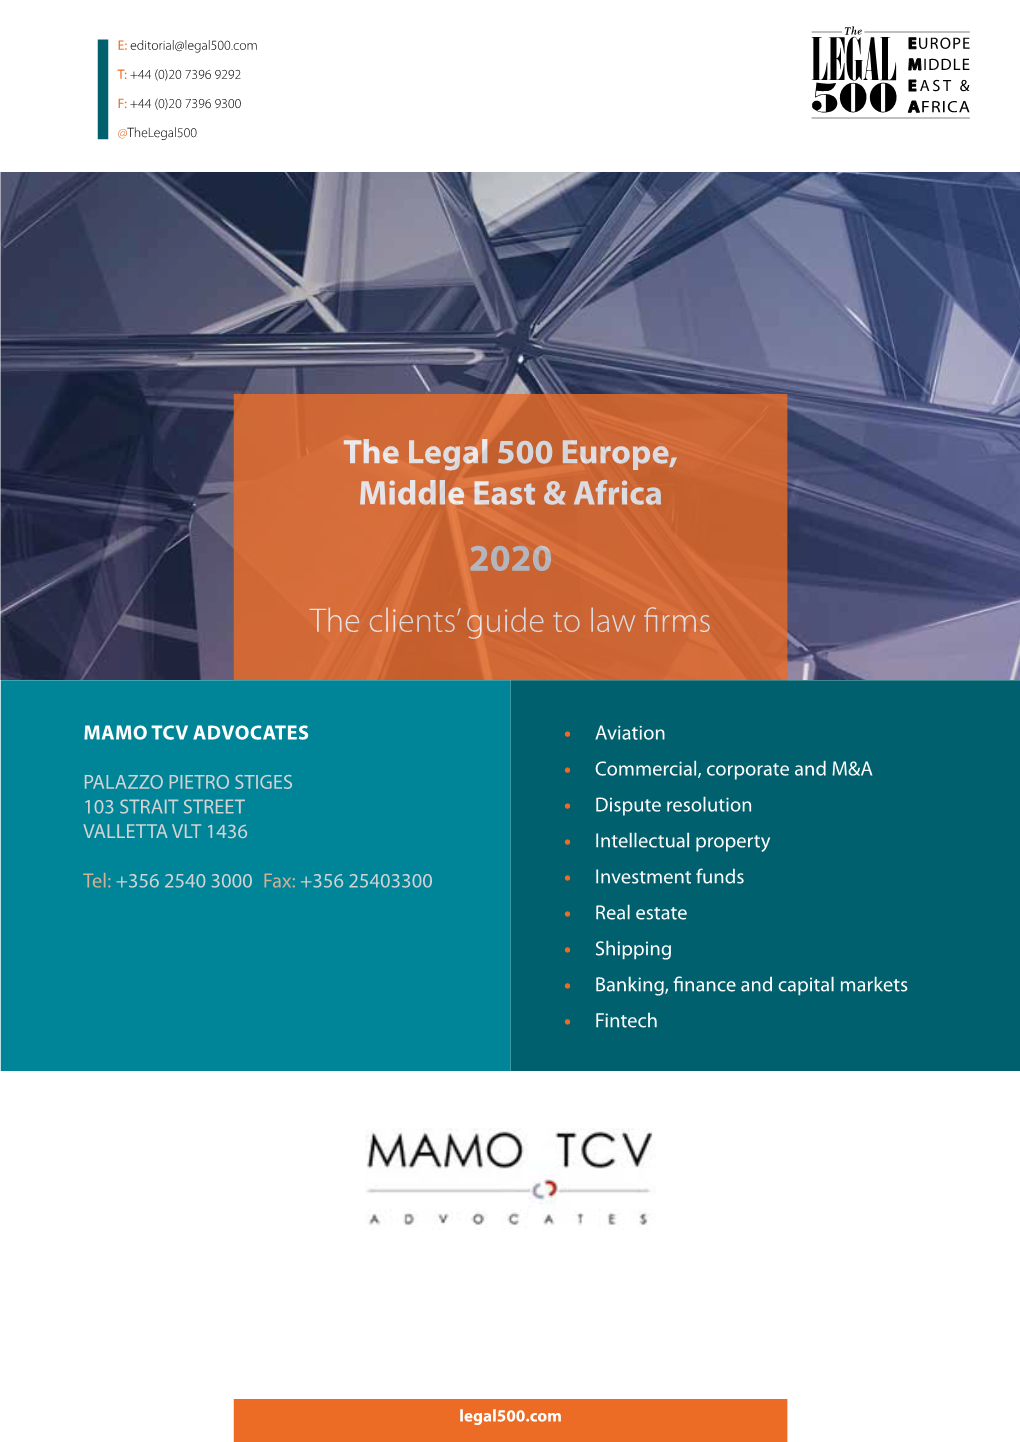 Mamo TCV Advocates • Aviation • Commercial, Corporate and M&A PALAZZO PIETRO STIGES 103 STRAIT STREET • Dispute Resolution VALLETTA VLT 1436 • Intellectual Property